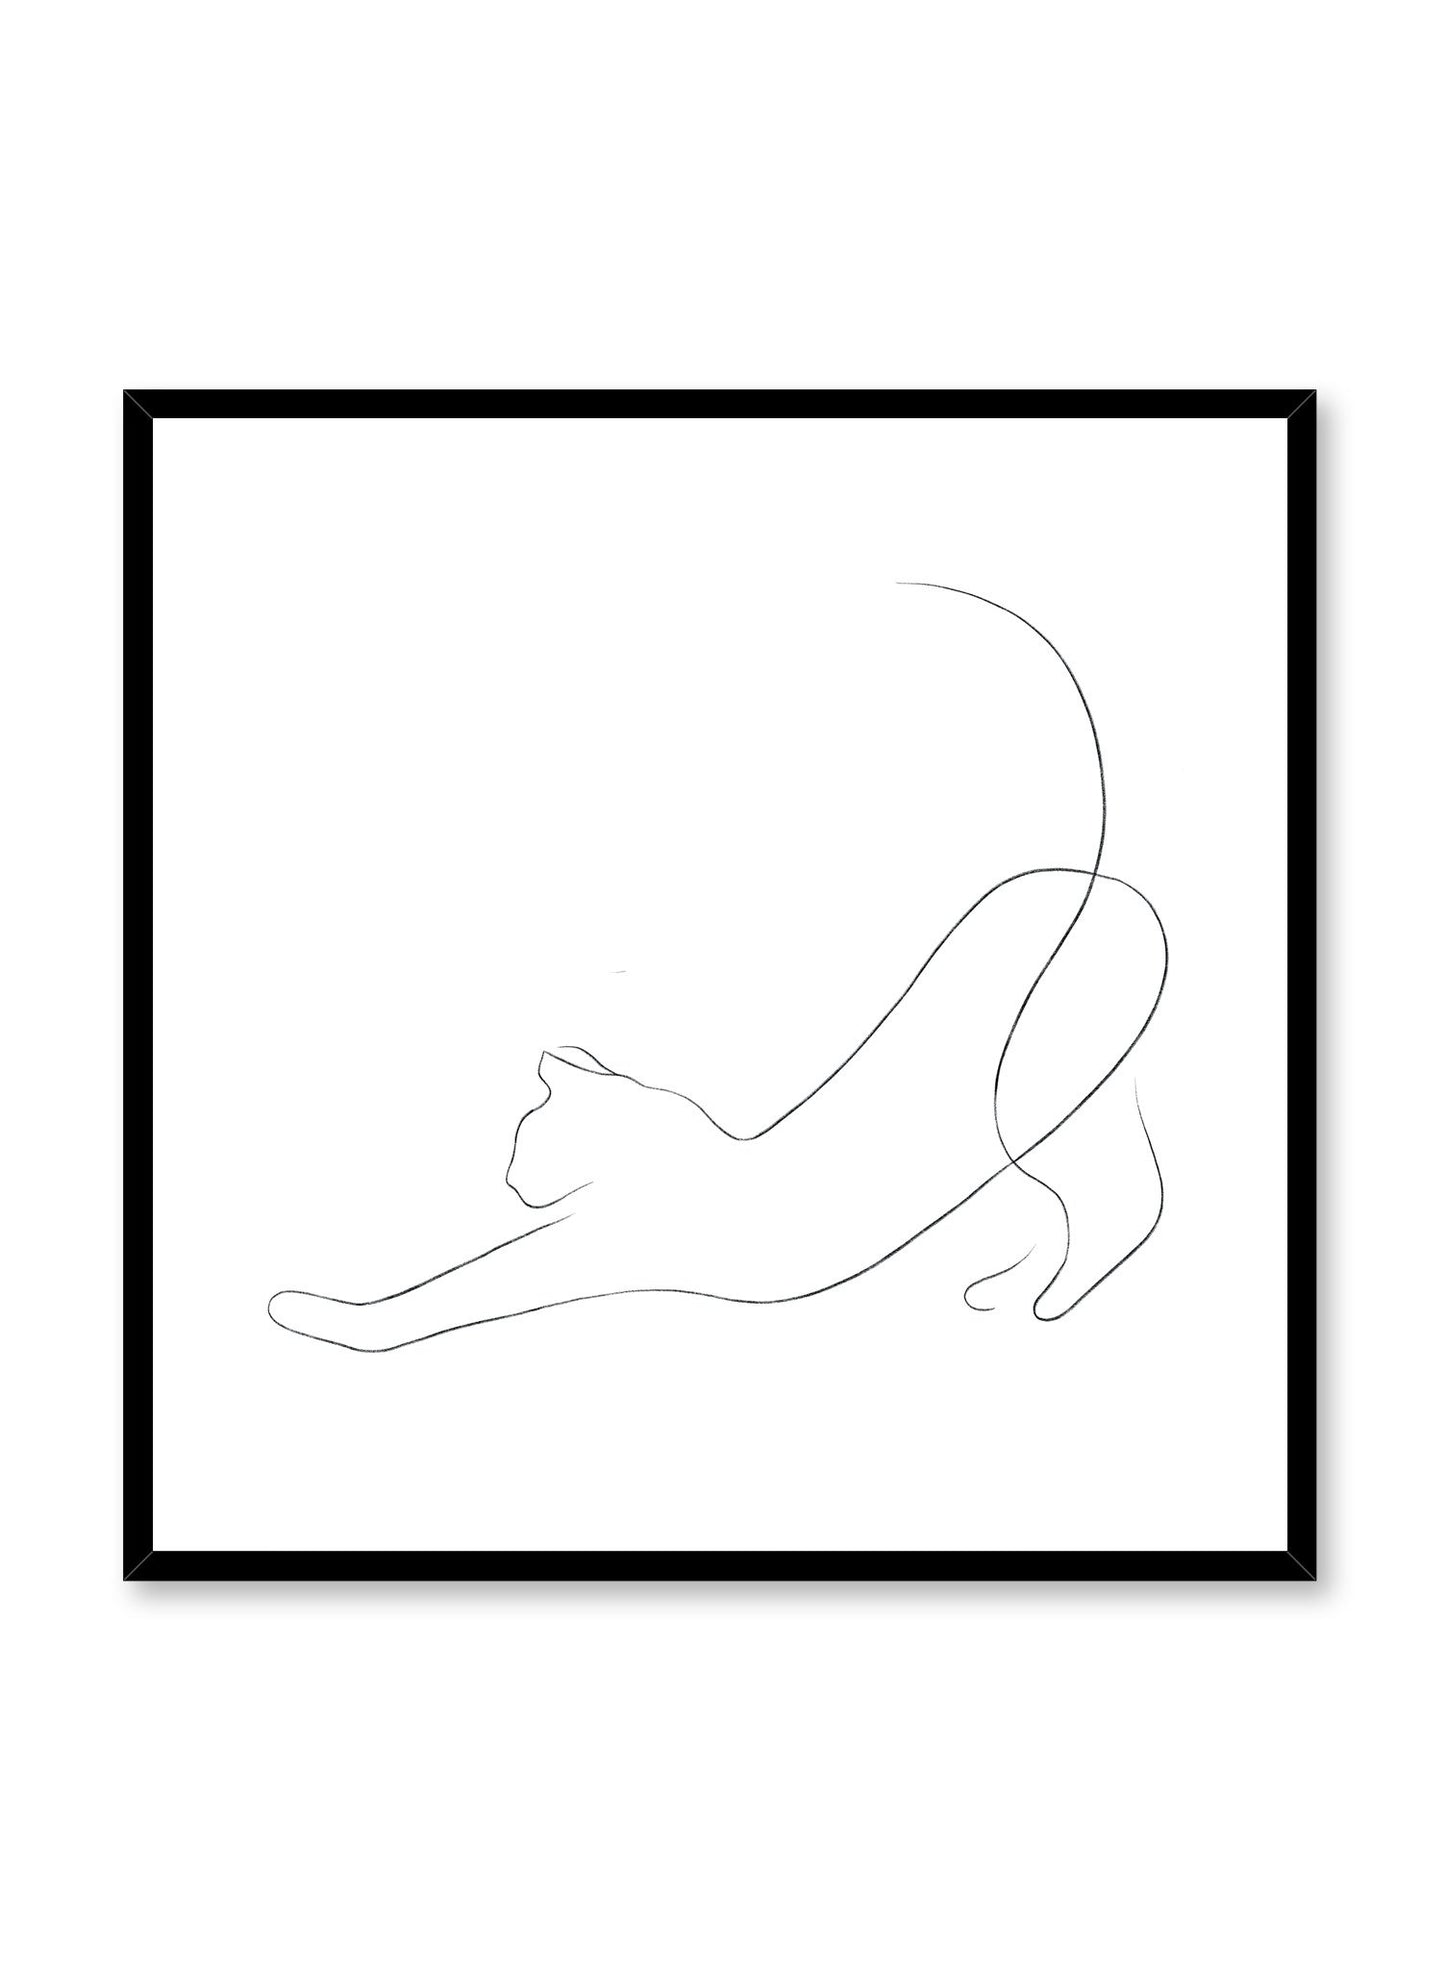 Modern minimalist poster by Opposite Wall with abstract illustration of stretching cat line art